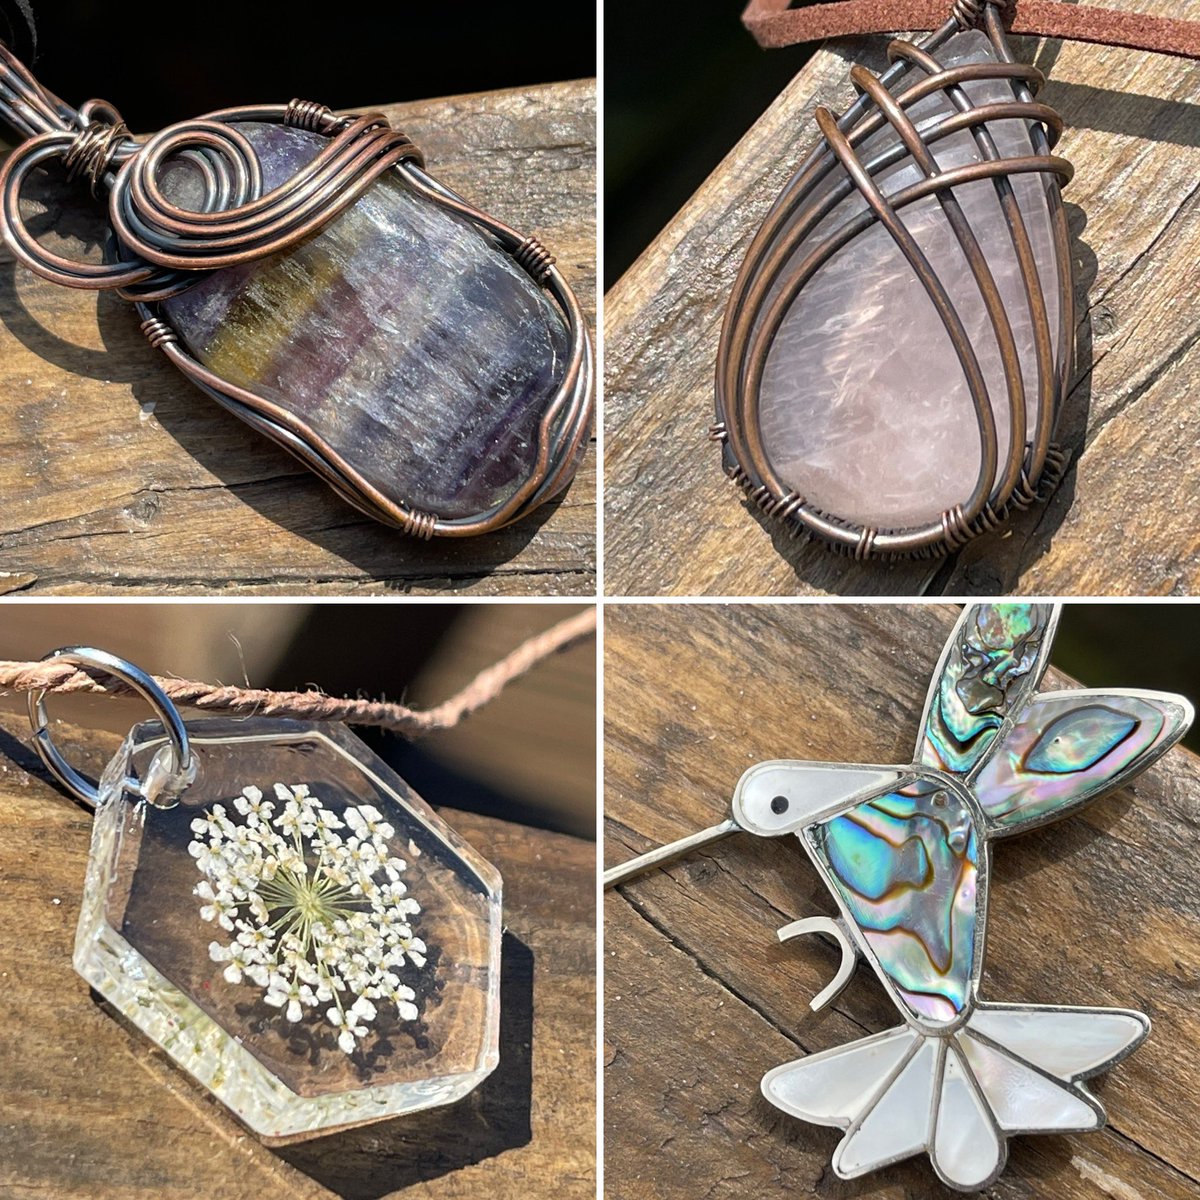 Boho jewellery. To see all and to find out more, please go to ecooctopus.etsy.com 🙂 #earlybiz #mhhsbd #elevenseshour #boho